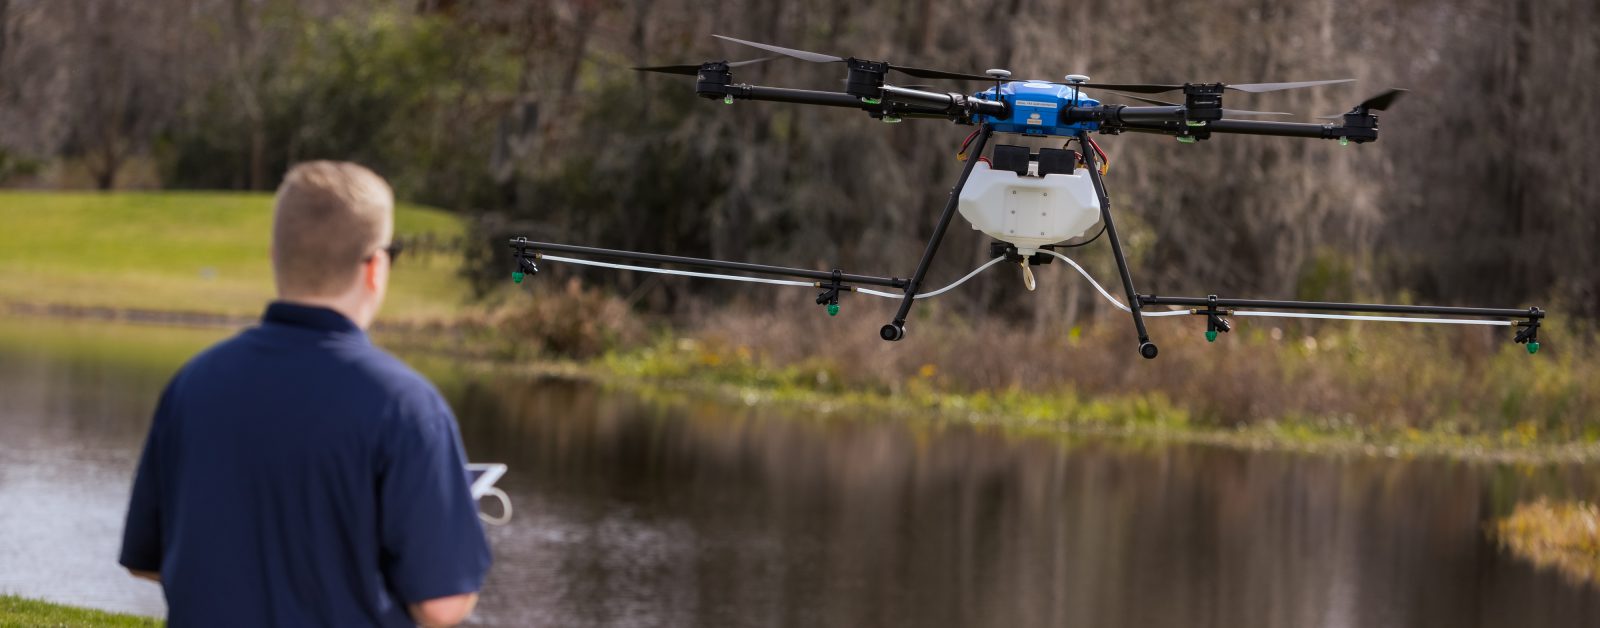 Introducing Drone Technology for Lake and Pond